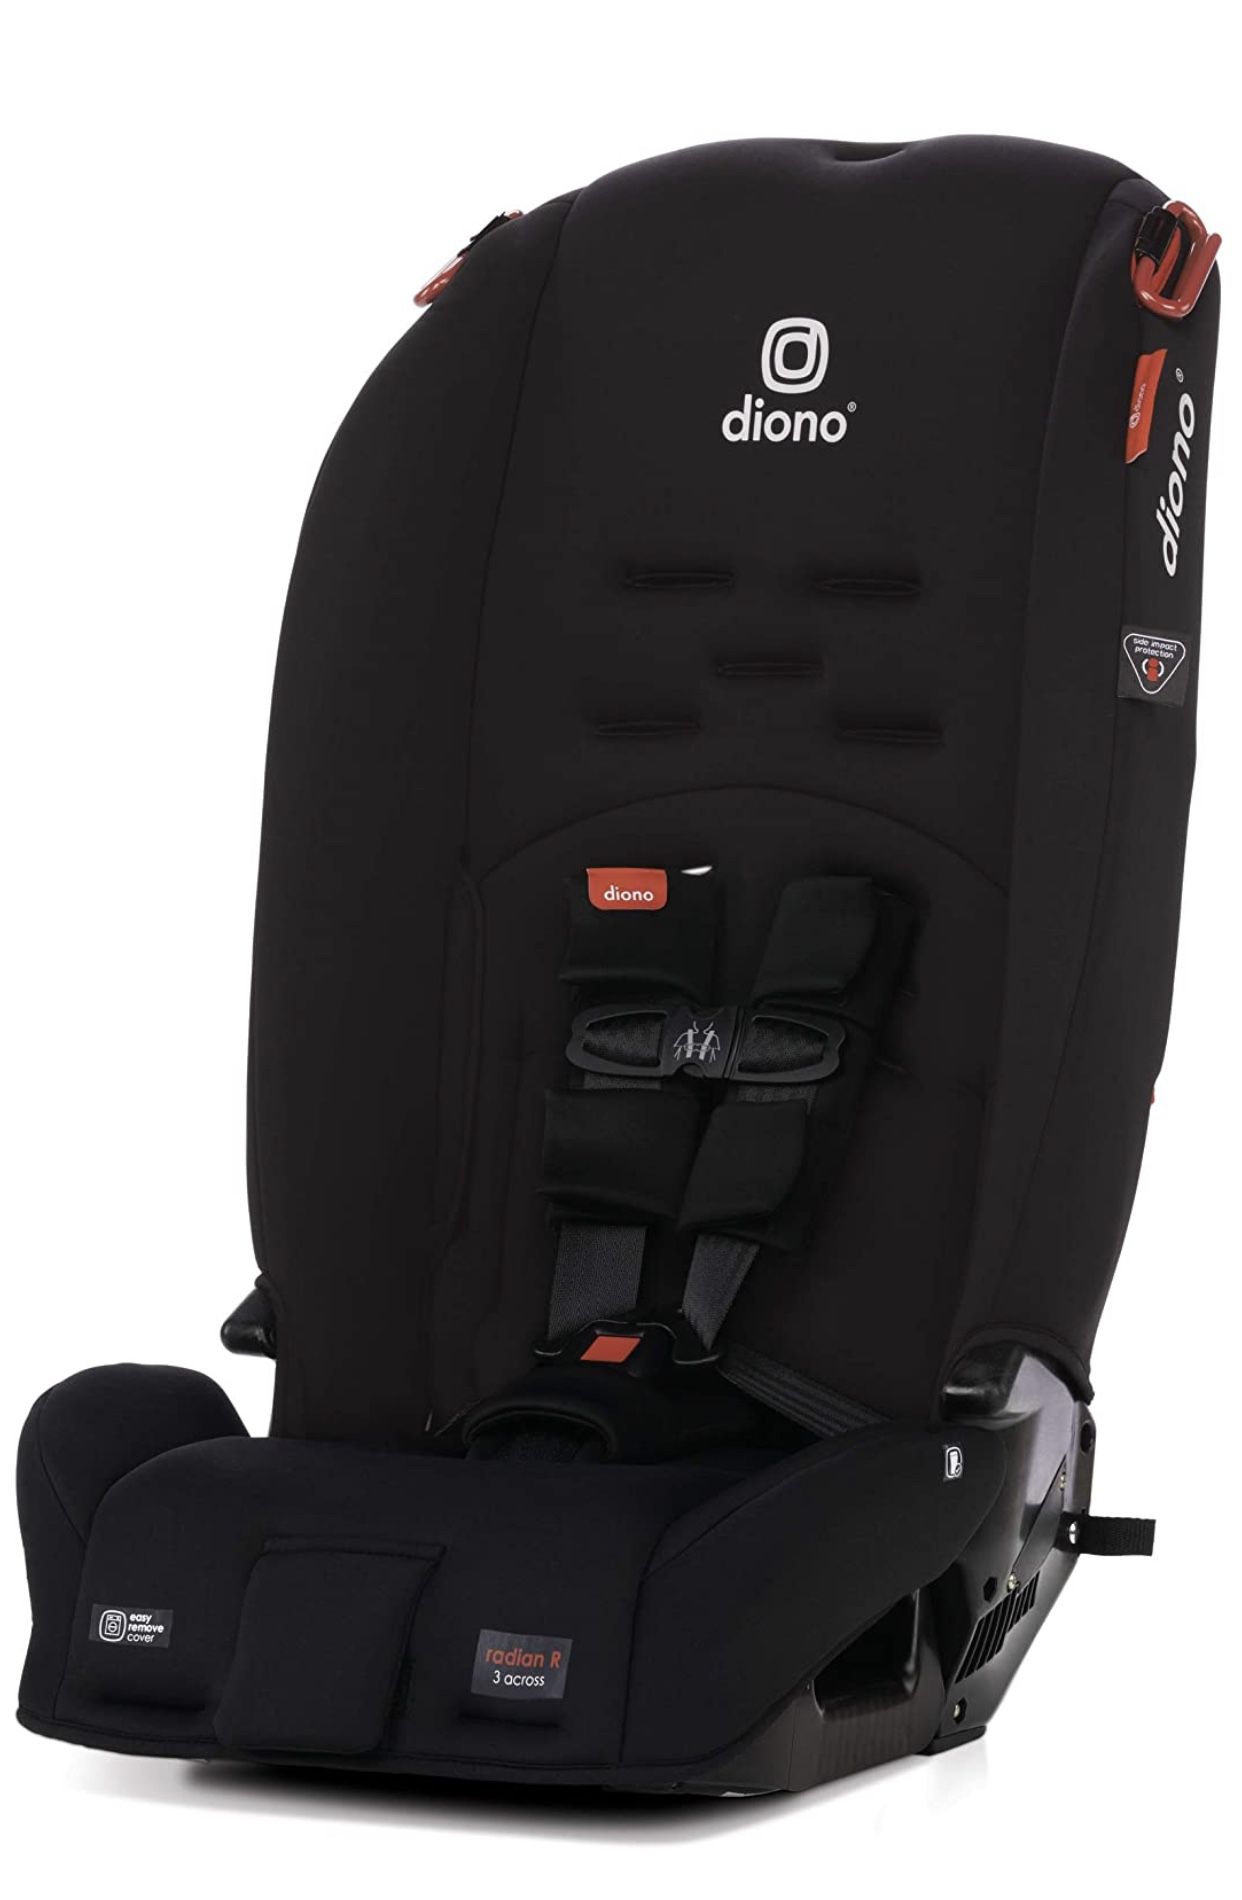 Diono 2020 Radian 3R, 3 in 1 Convertible, 10 years 1 Car Seat, Slim Fit Design, Fits 3 Across, Black Jet